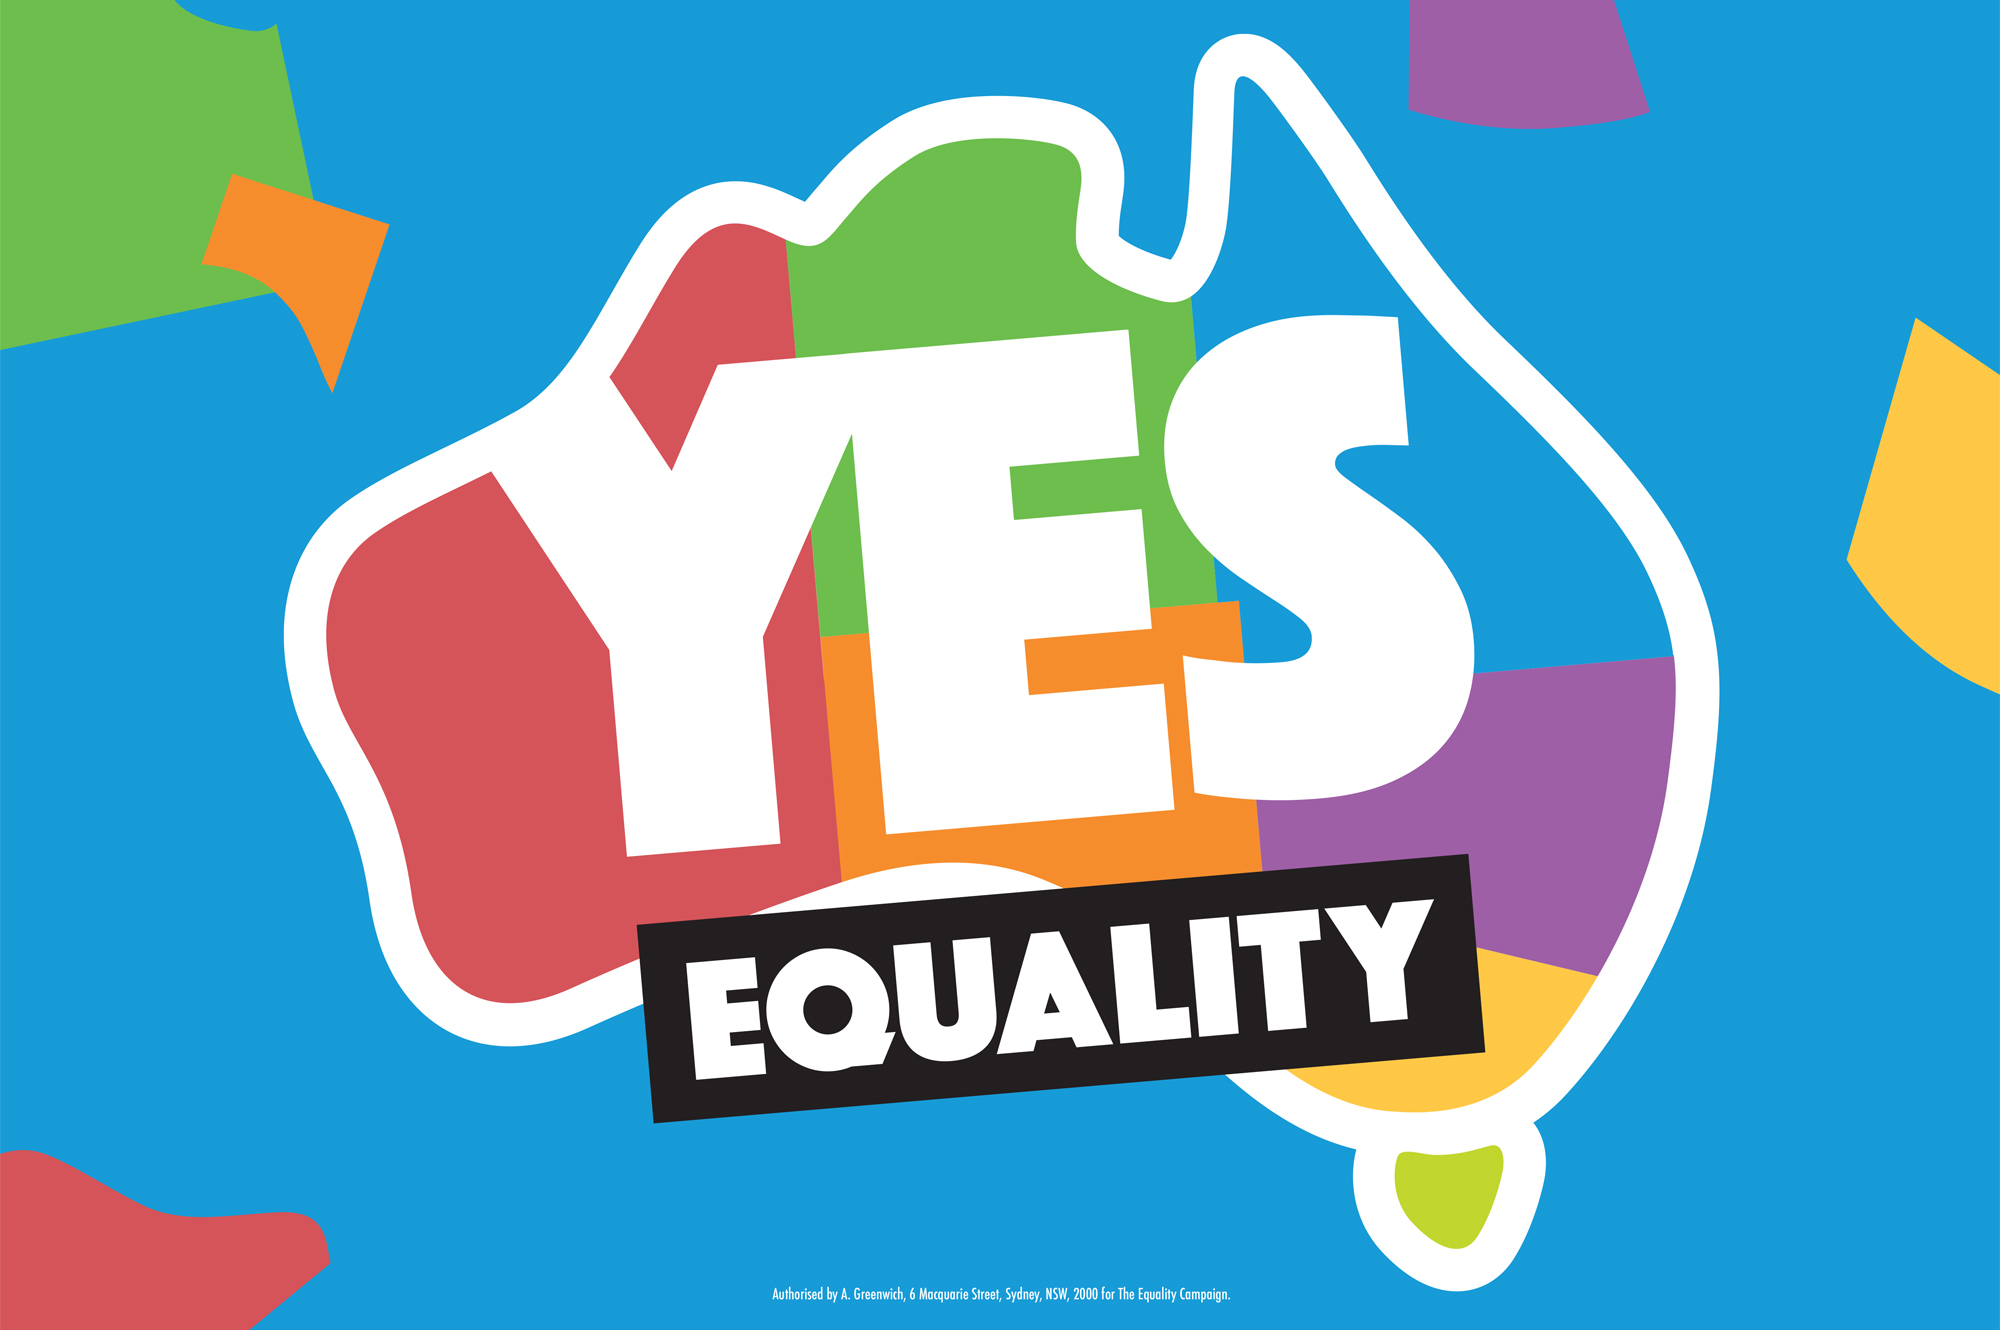 Australien Ja Ehe für Alle Australia Voted Yes Same-Sex Marriage; Australian Marriage Equality is the campaign to achieve #MarriageEquality for Australia!